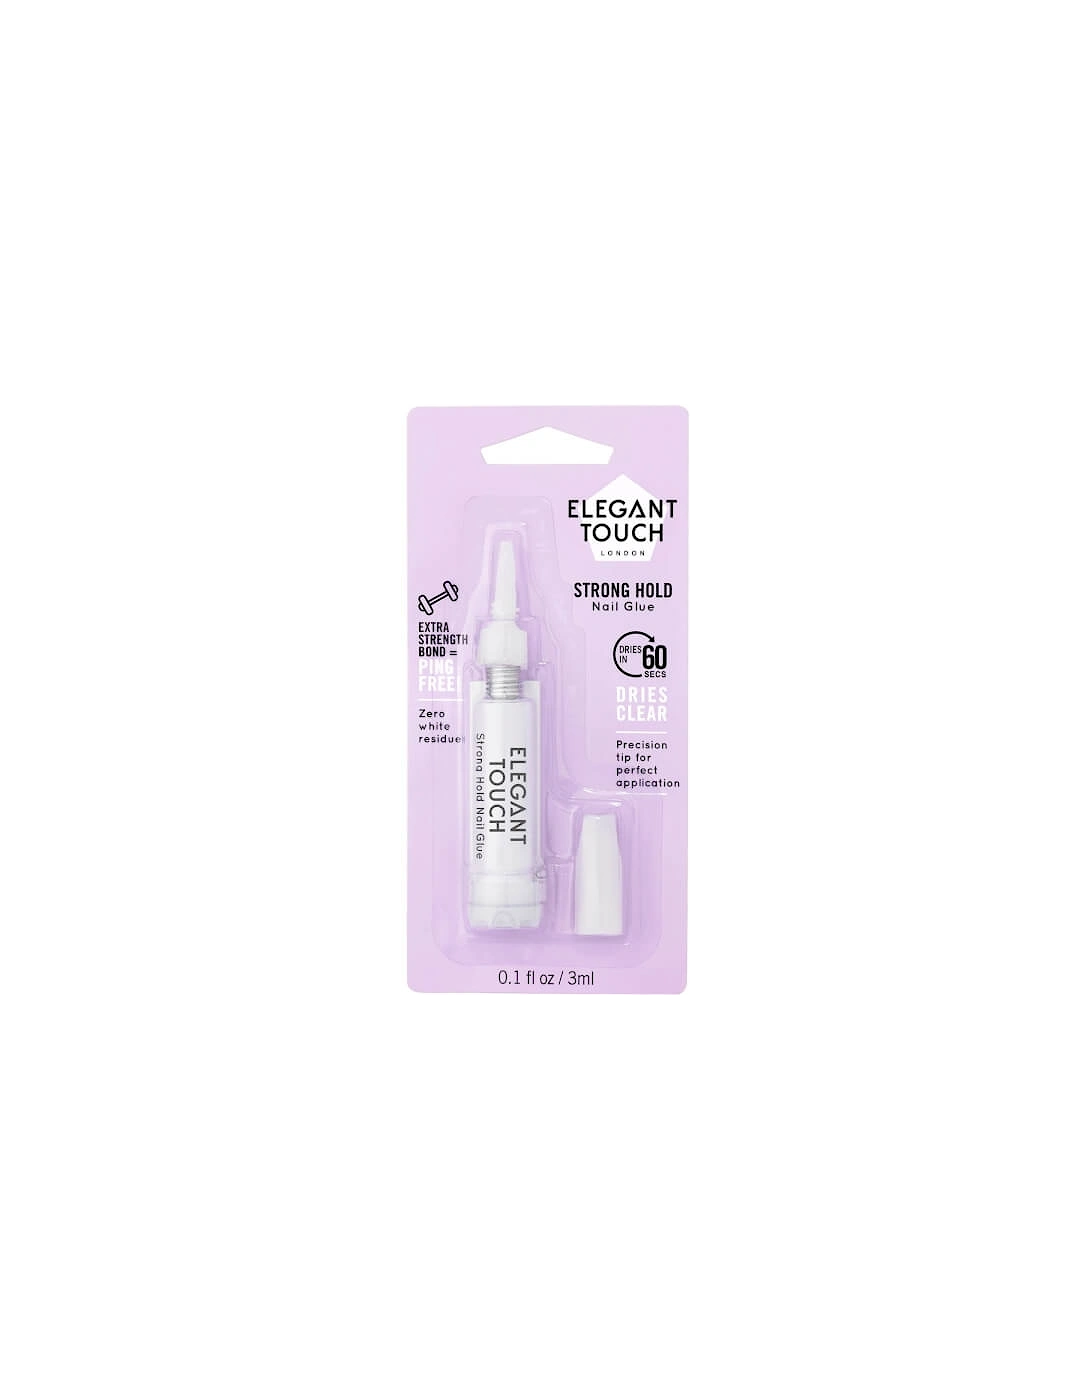 Strong Hold Nail Glue 3g - Elegant Touch, 2 of 1